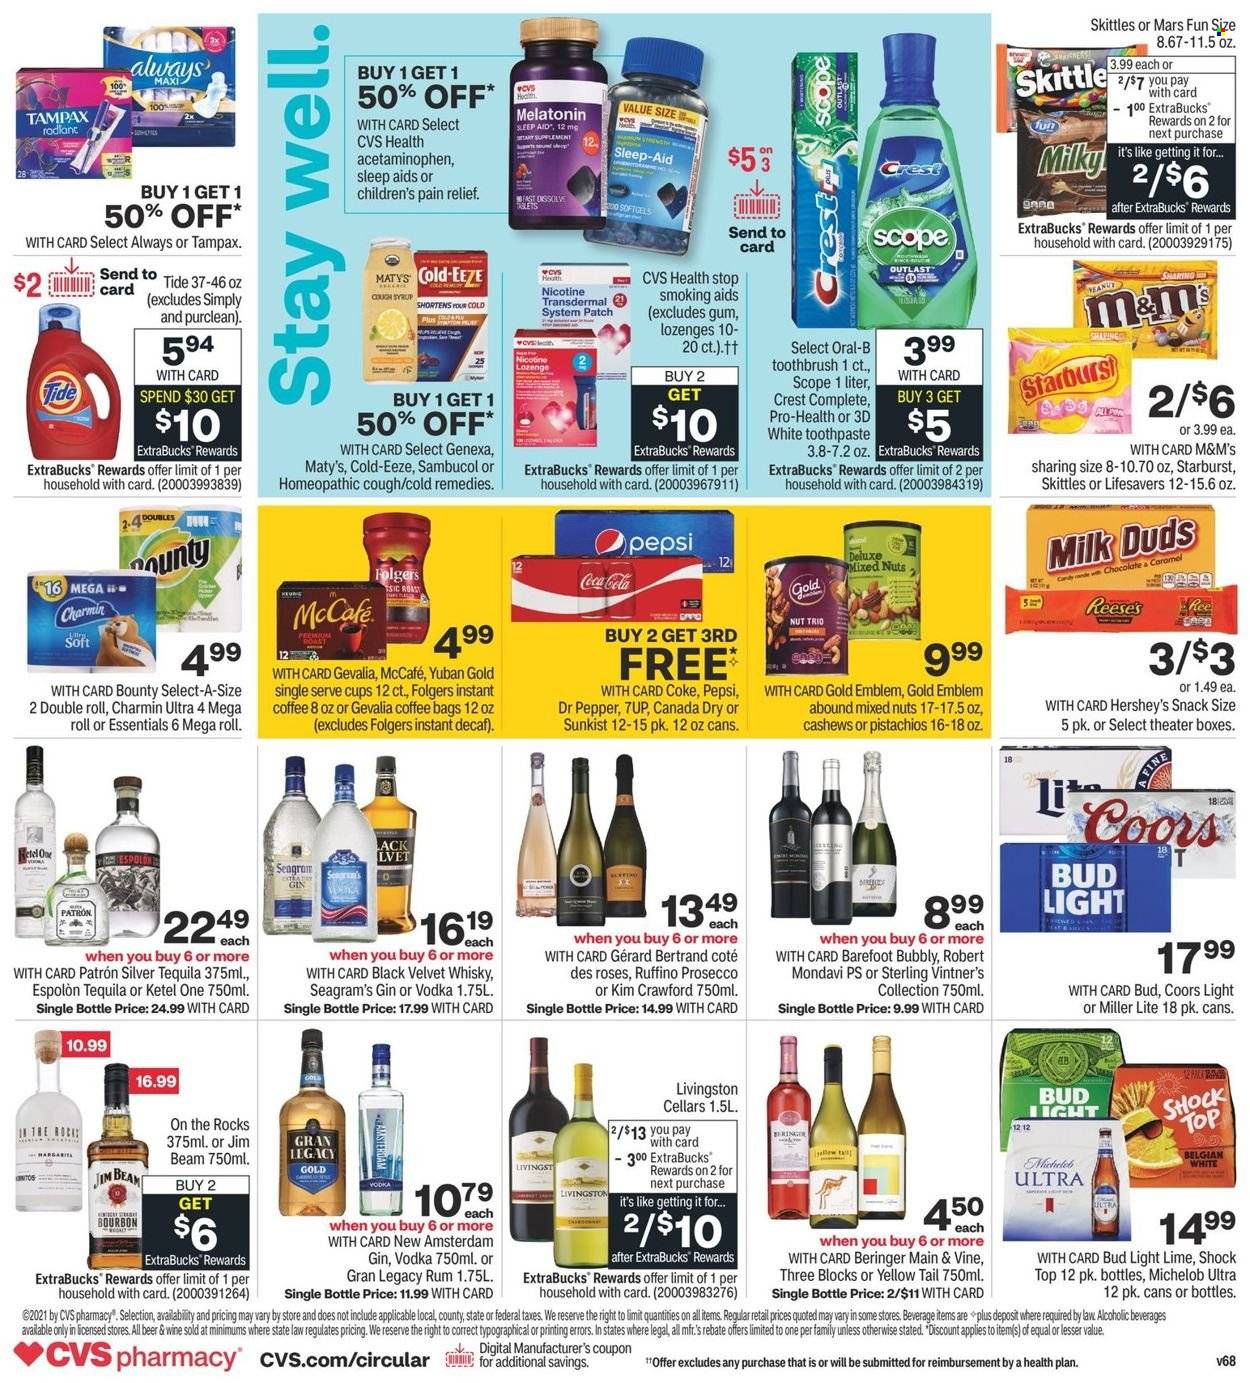 thumbnail - CVS Pharmacy Flyer - 09/19/2021 - 09/25/2021 - Sales products - Reese's, Hershey's, chocolate, snack, Milk Duds, Bounty, Mars, M&M's, Skittles, Starburst, cashews, pistachios, mixed nuts, Canada Dry, Coca-Cola, Pepsi, Dr. Pepper, 7UP, instant coffee, Folgers, McCafe, Gevalia, prosecco, wine, bourbon, gin, rum, tequila, vodka, Jim Beam, whisky, Charmin, Tide, toothbrush, Oral-B, toothpaste, Crest, Tampax, pain relief, syrup, Sambucol, Cold-EEZE, beer, Bud Light, Miller Lite, Coors, Michelob. Page 2.